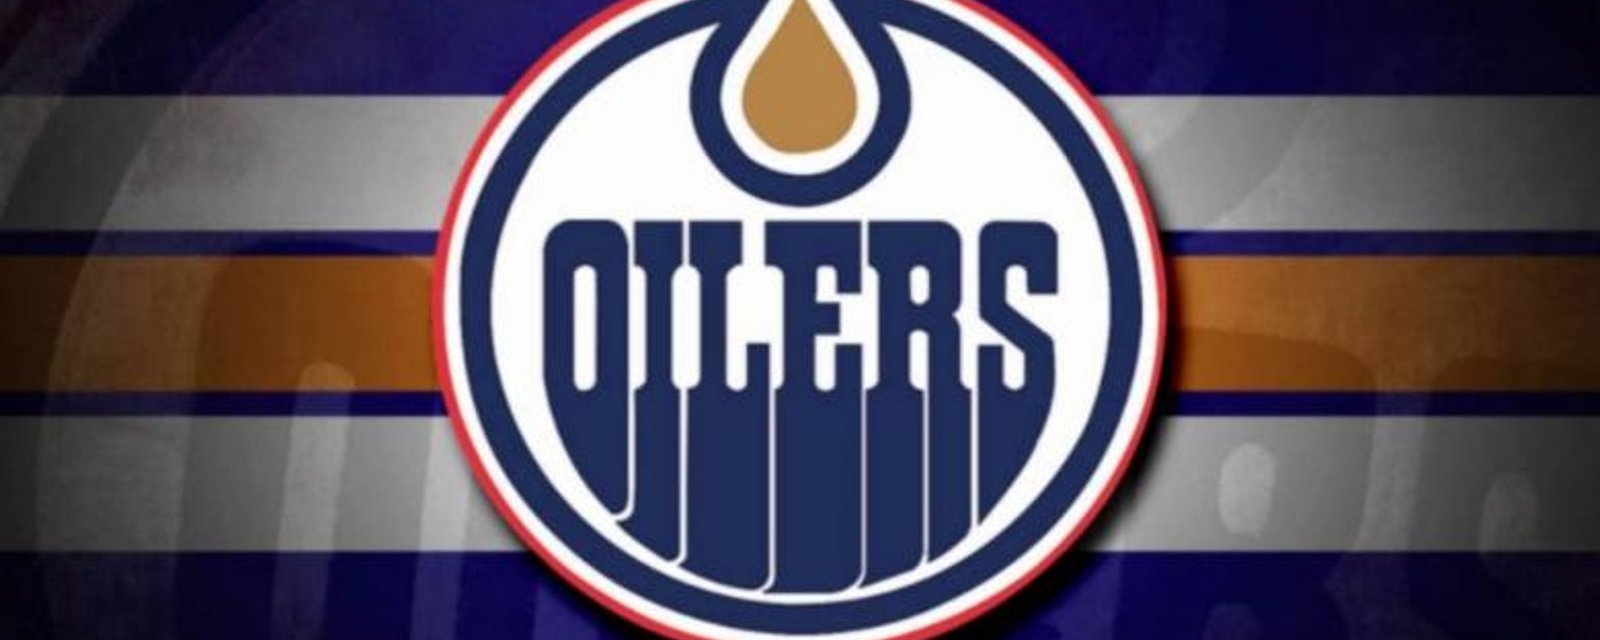 Chiarelli Continues To Reshape Oilers Roster